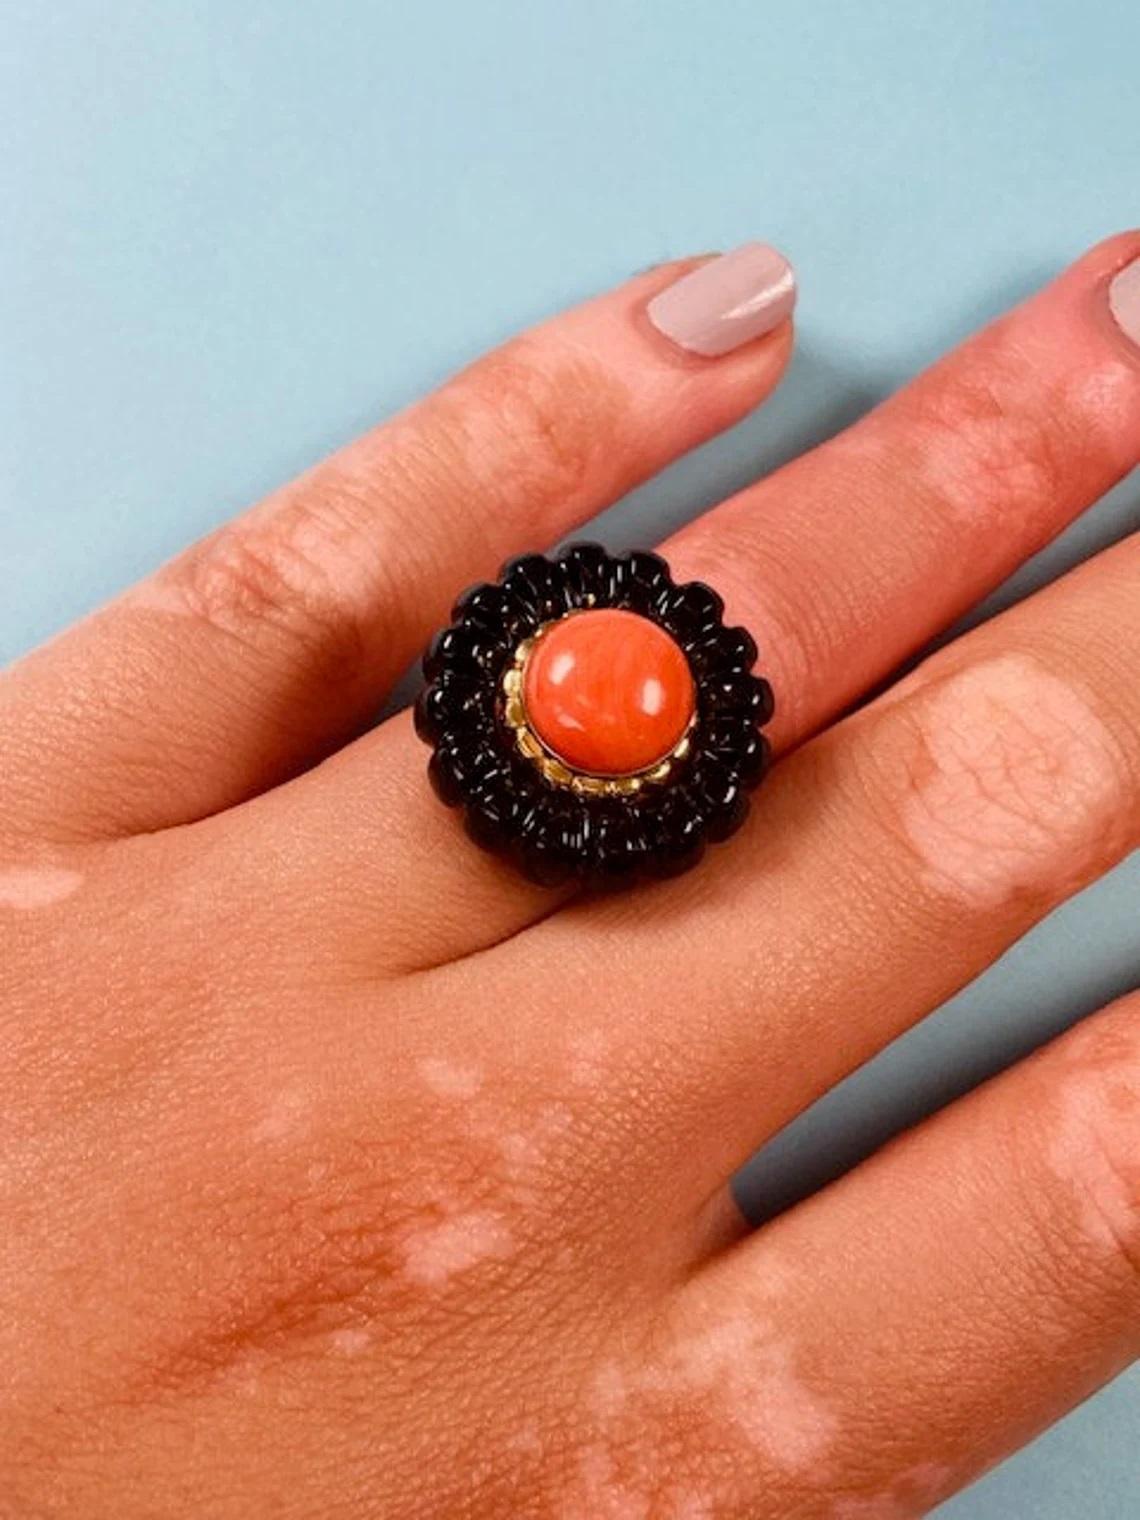 Vintage 14k Gold Coral & Onyx Flower Ring One-of-a-kind

This 14k gold ring from the 1980s is the perfect bold statement piece. The scalloped onyx layer around the eye-catching coral centre make for a truly exciting ring. It is made to comfortably